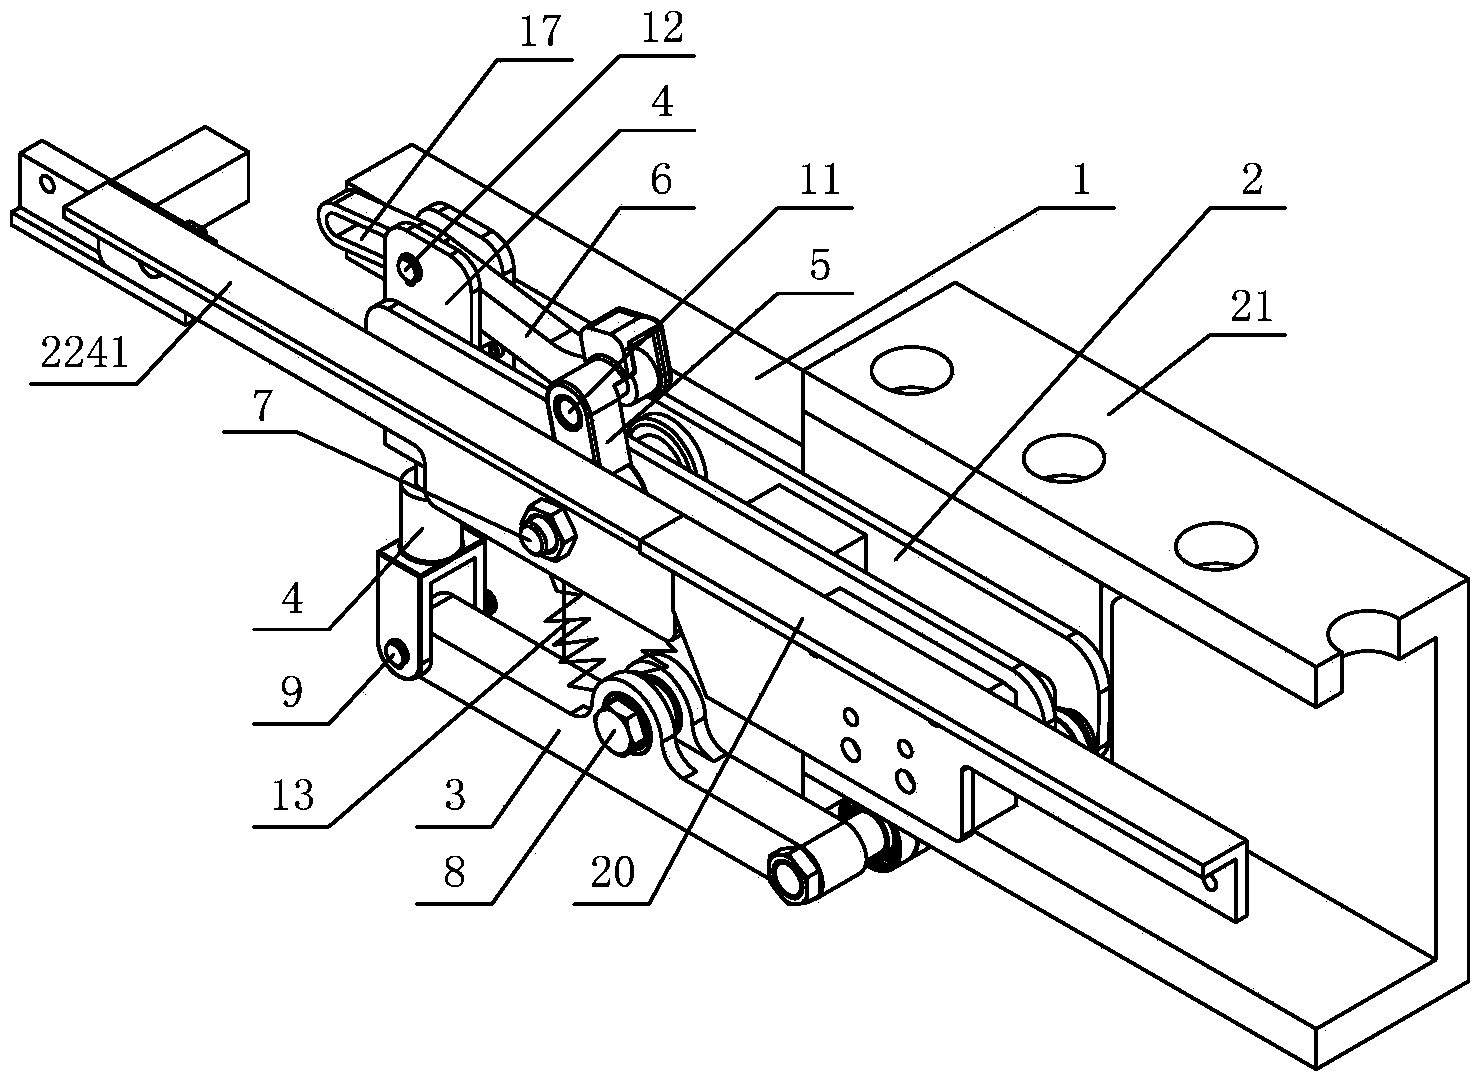 Son-mother trolley doffer six-connecting-rod guiding track abutting connection self-locking mechanism